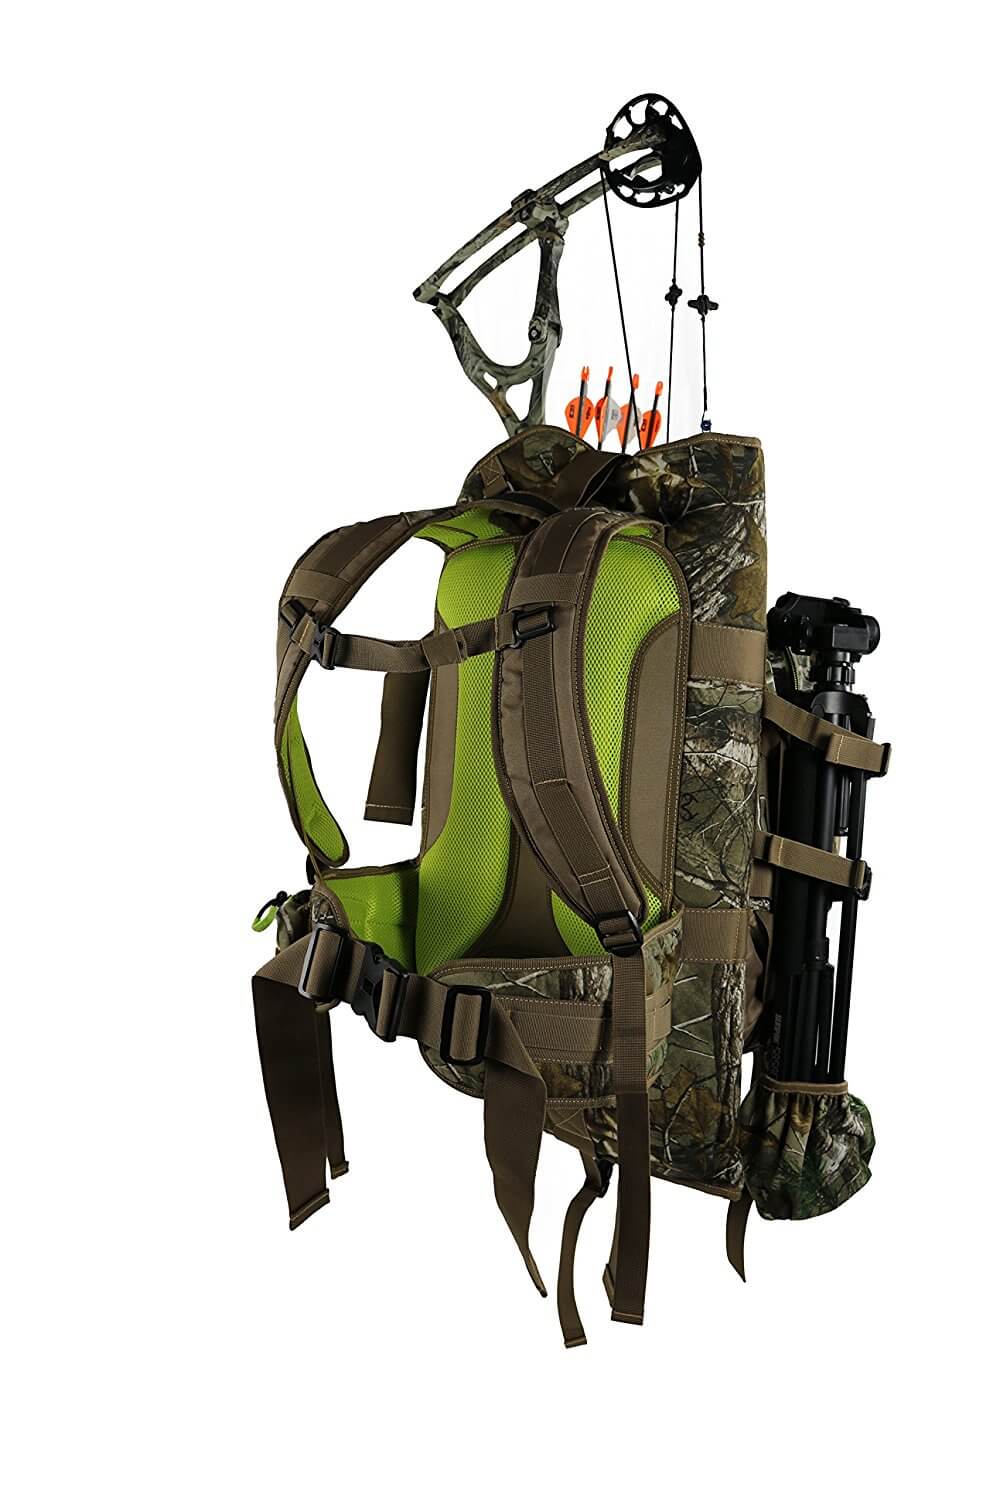 Ultimate Buyer's Guide: 7 Best Bow Hunting Backpacks in 2021 | Men's Gear